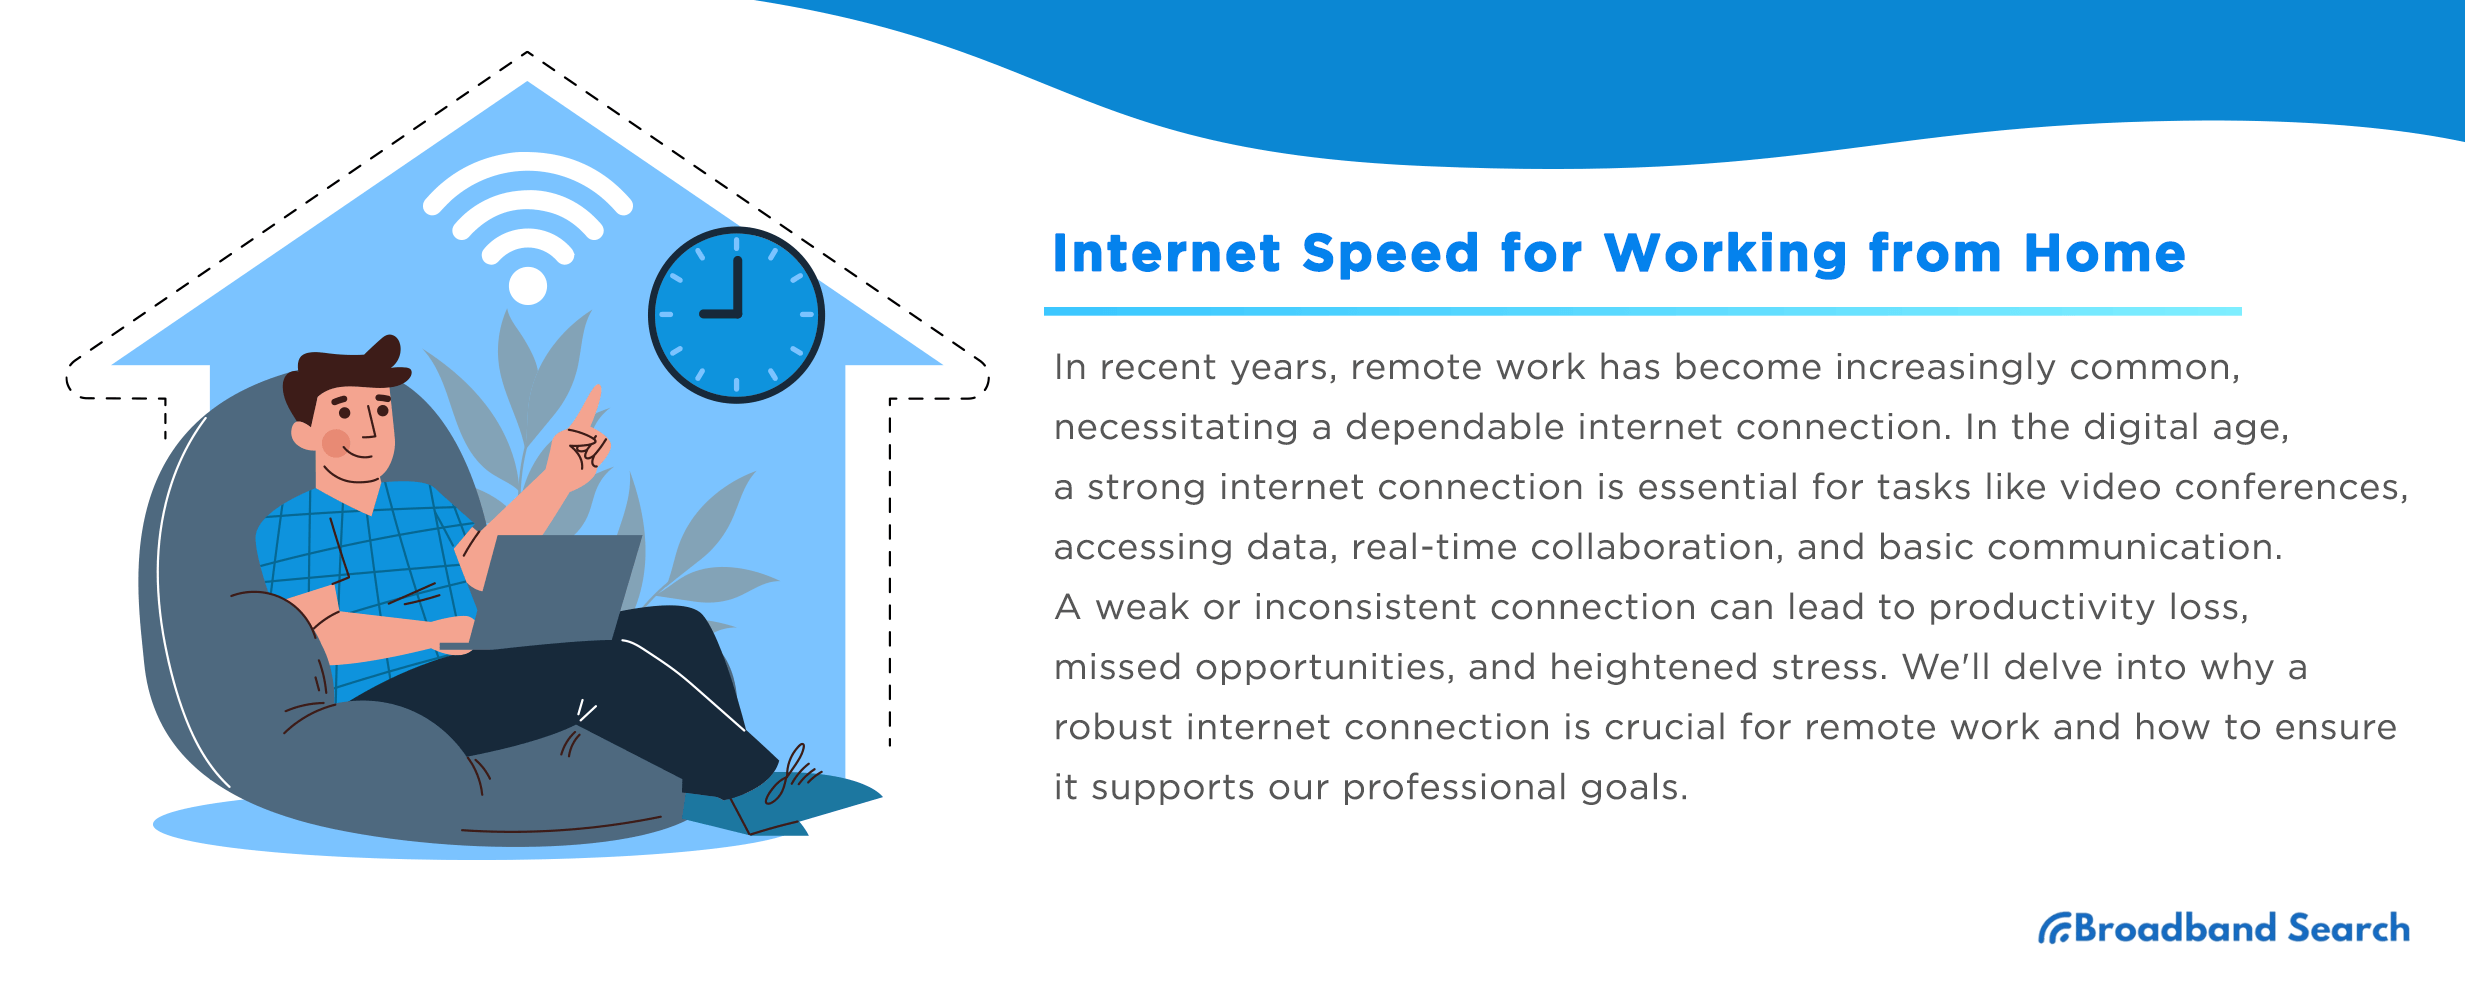 Find Your Ideal Internet Speed for Working from Home